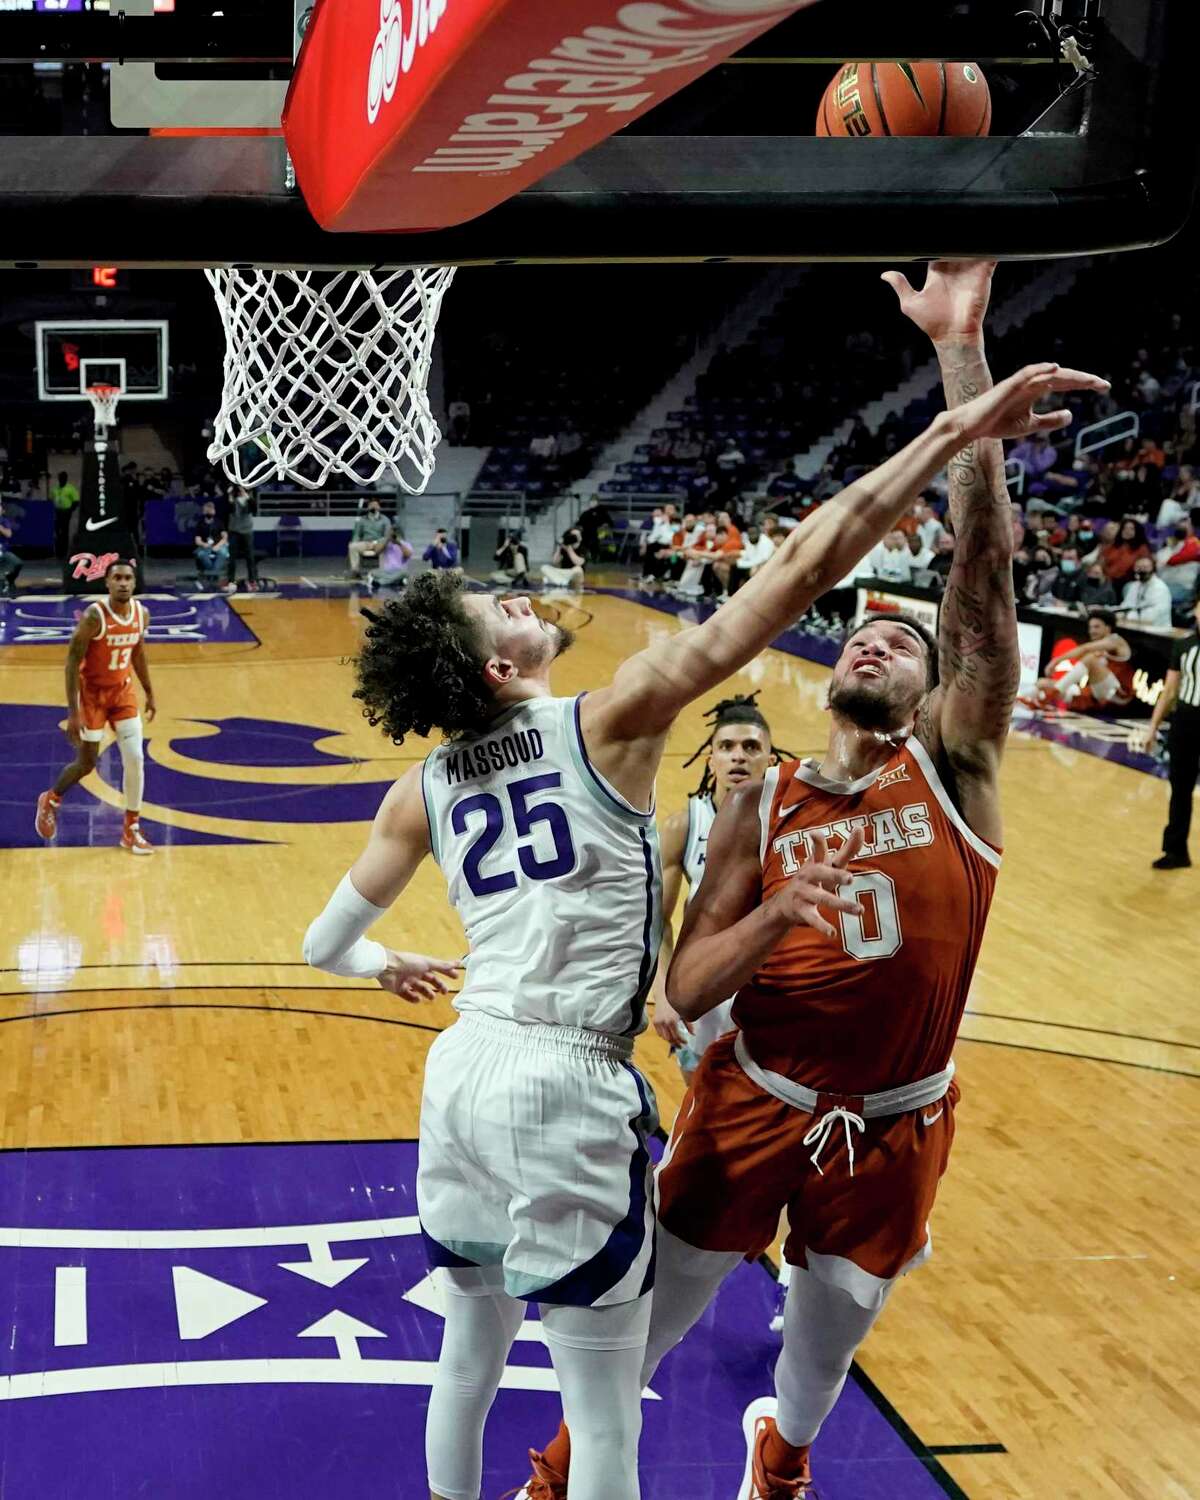 Texas forward Timmy Allen (0) gets past Kansas State forward Ismael Massoud (25) to put up a shot during the first half of an NCAA college basketball game Tuesday, Jan. 4, 2022, in Manhattan, Kan. (AP Photo/Charlie Riedel)